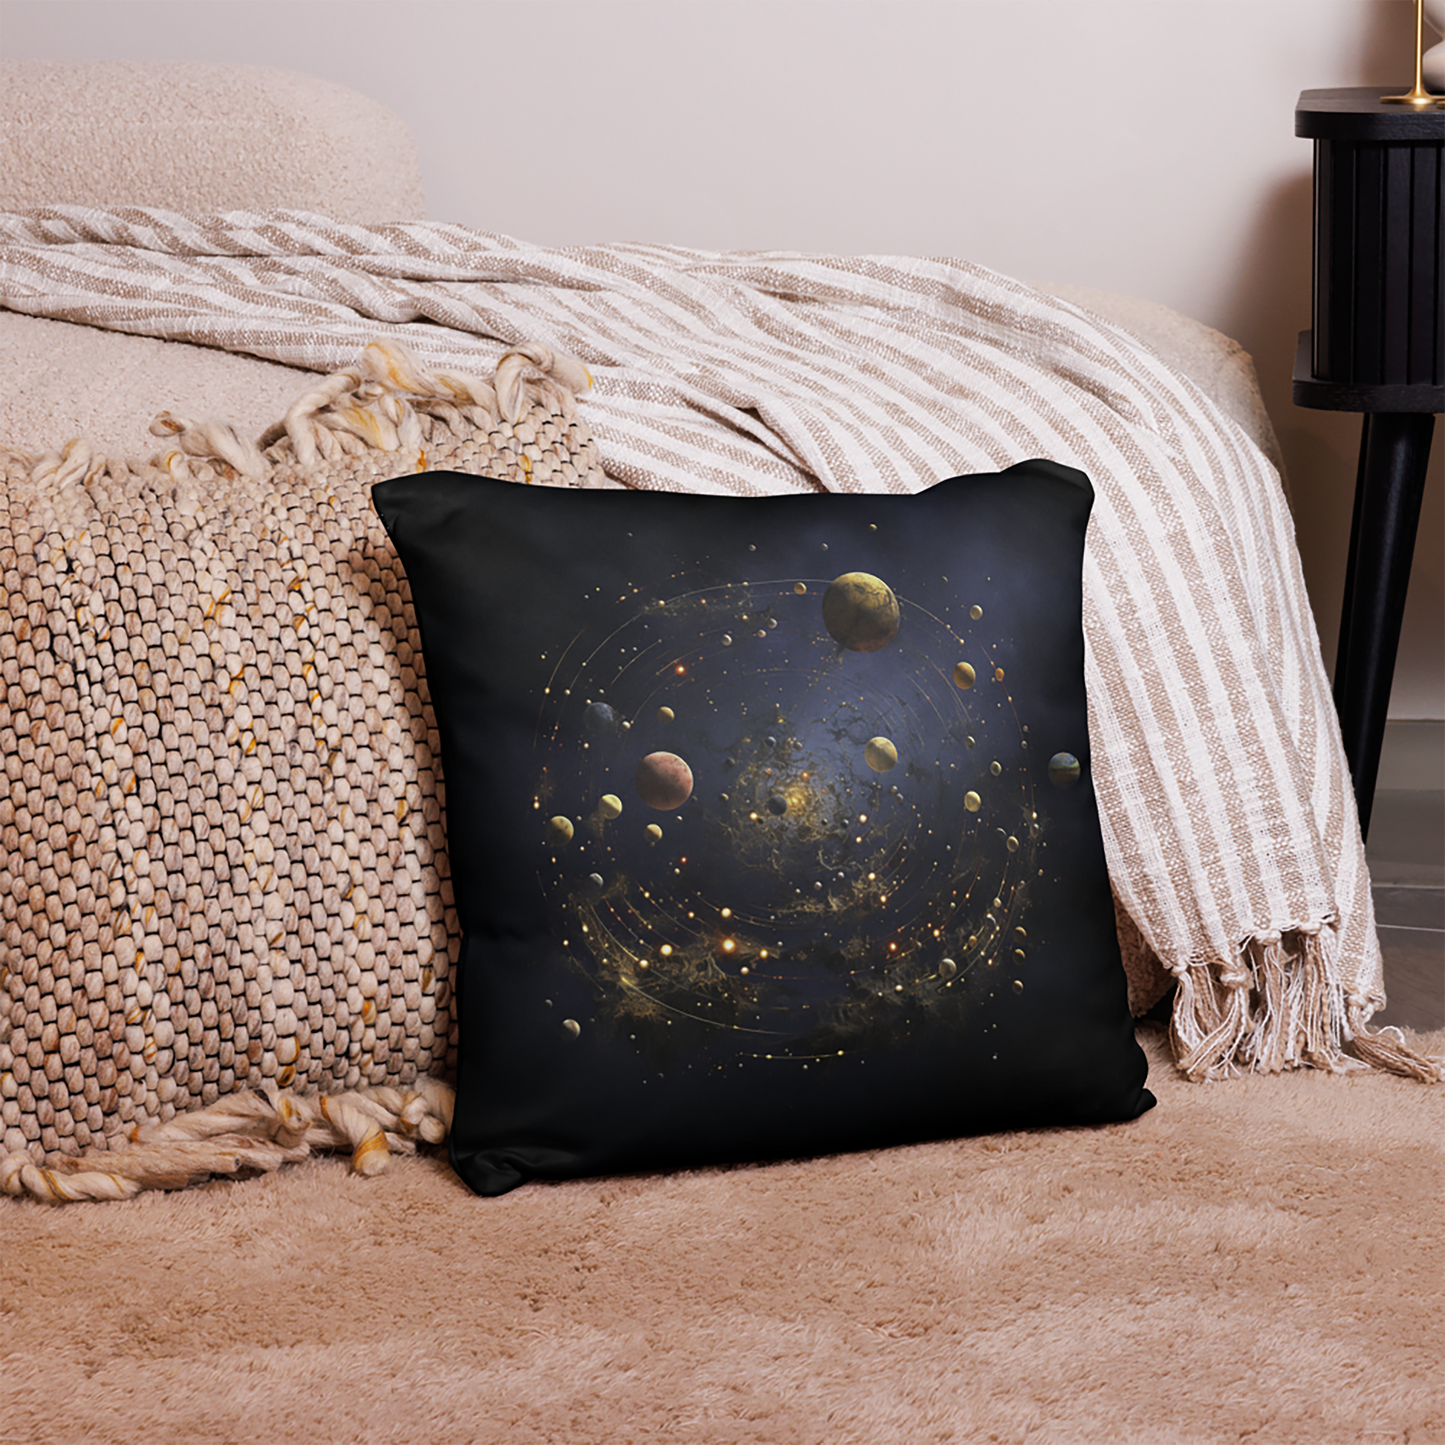 Space Throw Pillow Spiral Solar System Dream Polyester Decorative Cushion 18x18